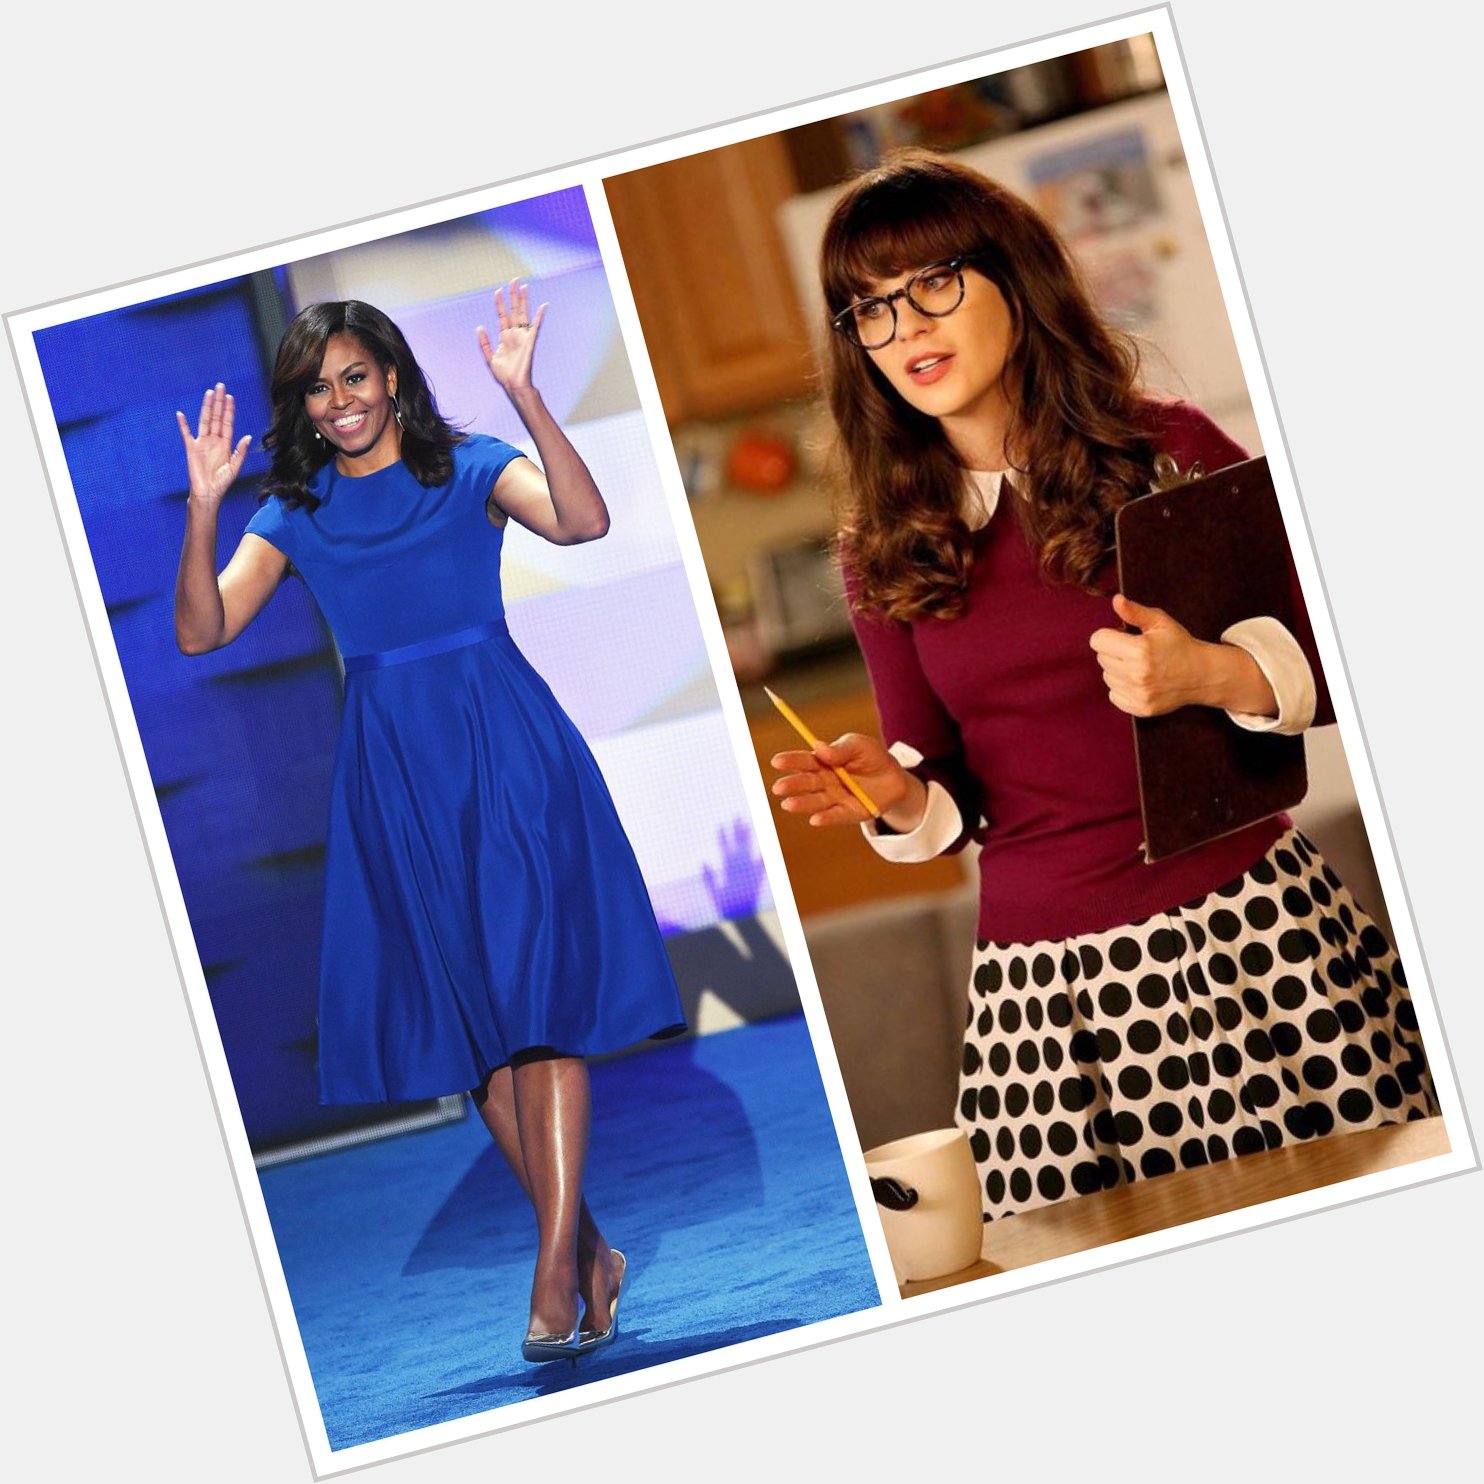 If Michelle Obama and Zooey Deschanel had a lovechild, it would be me. Happy Birthday to us all! 